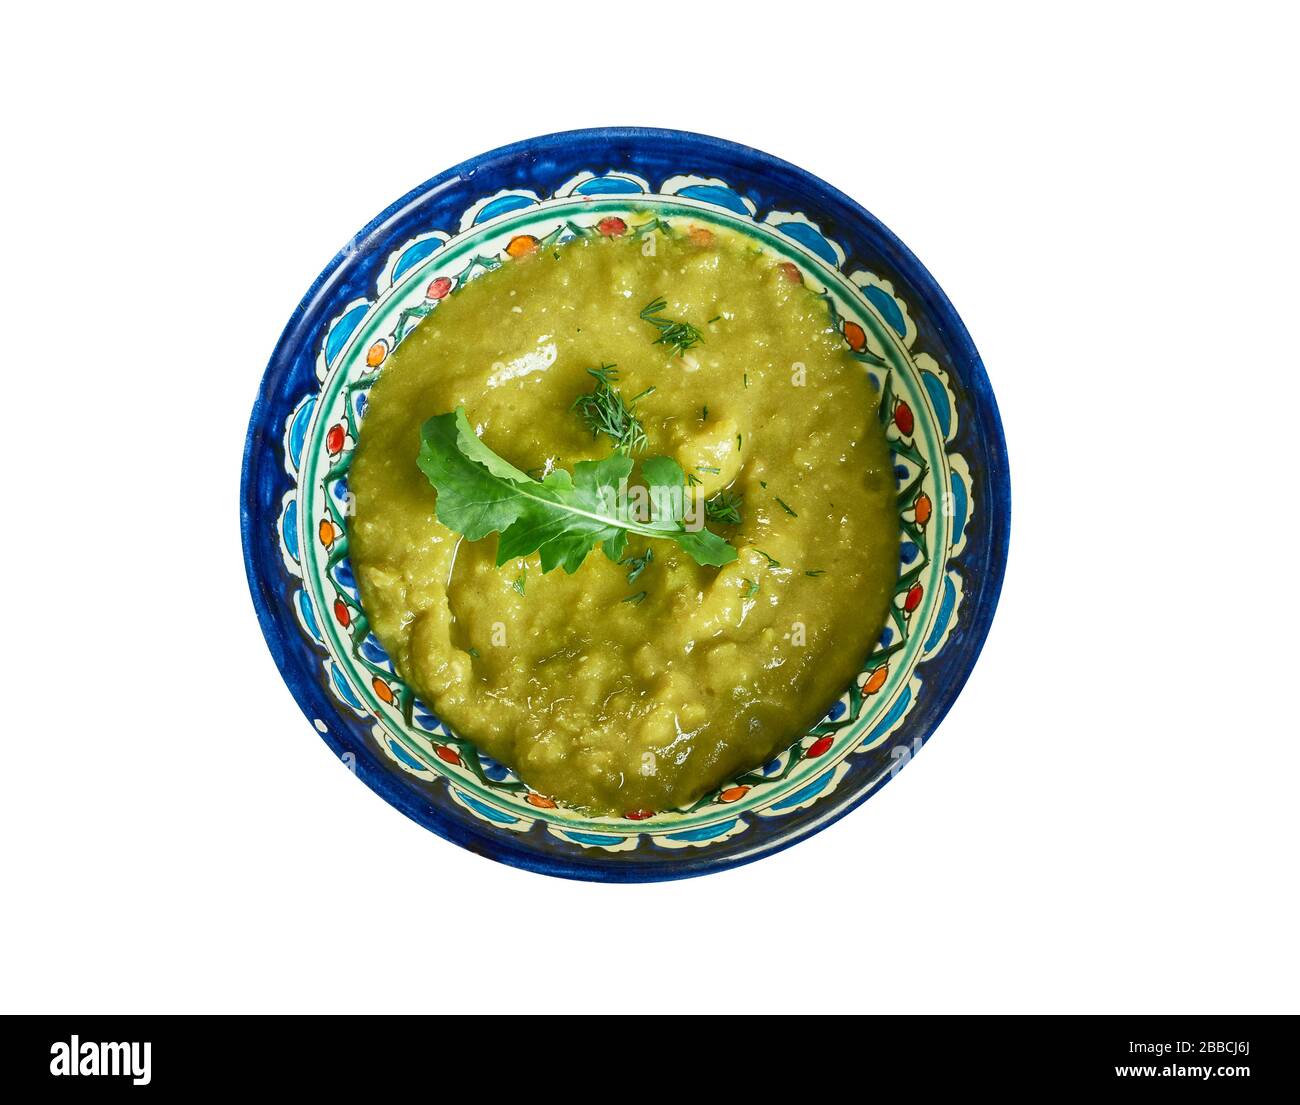 Spiced spinach dhal soup, Indian lentil soup. Stock Photo